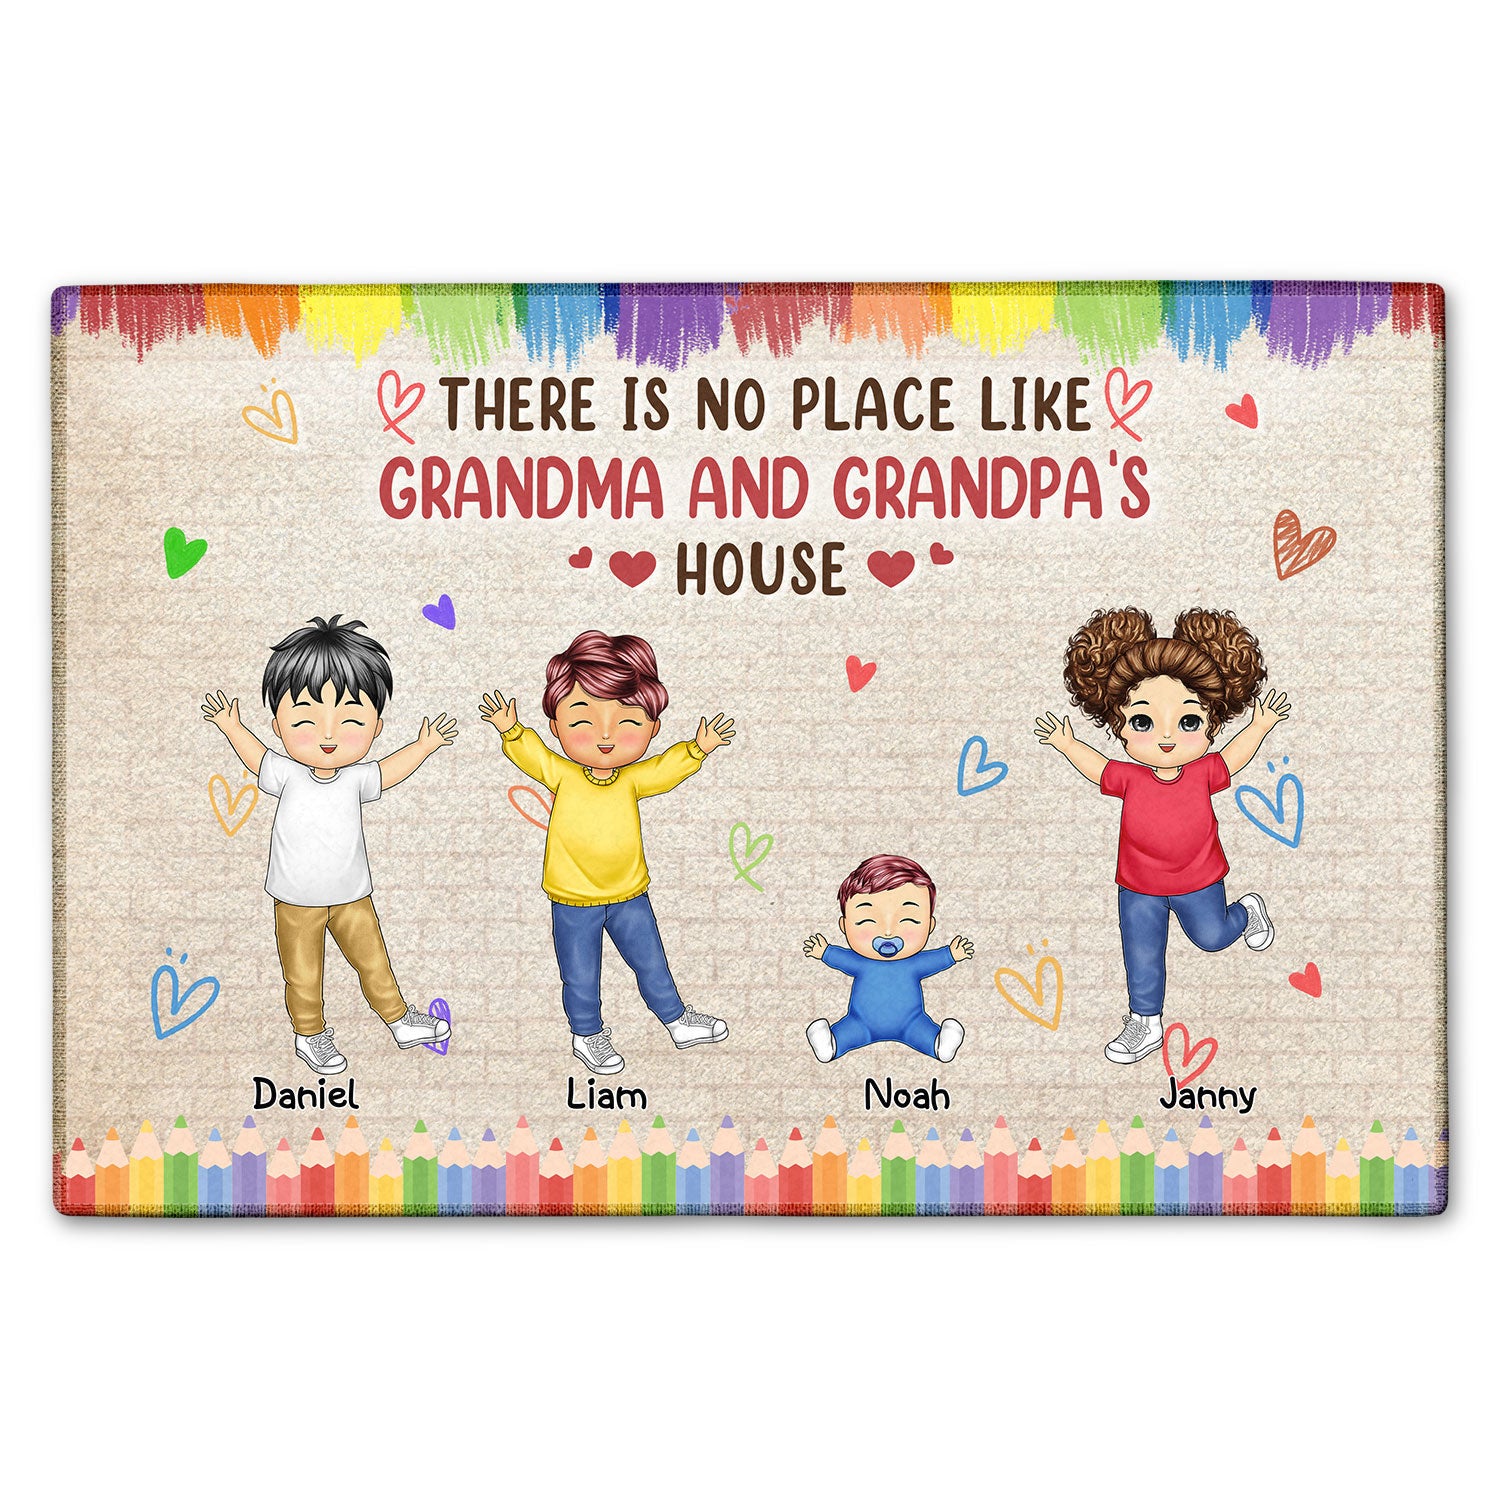 There Is No Place Like Grandma And Grandpa's House - Gift For Grandparents, Parents - Personalized Doormat